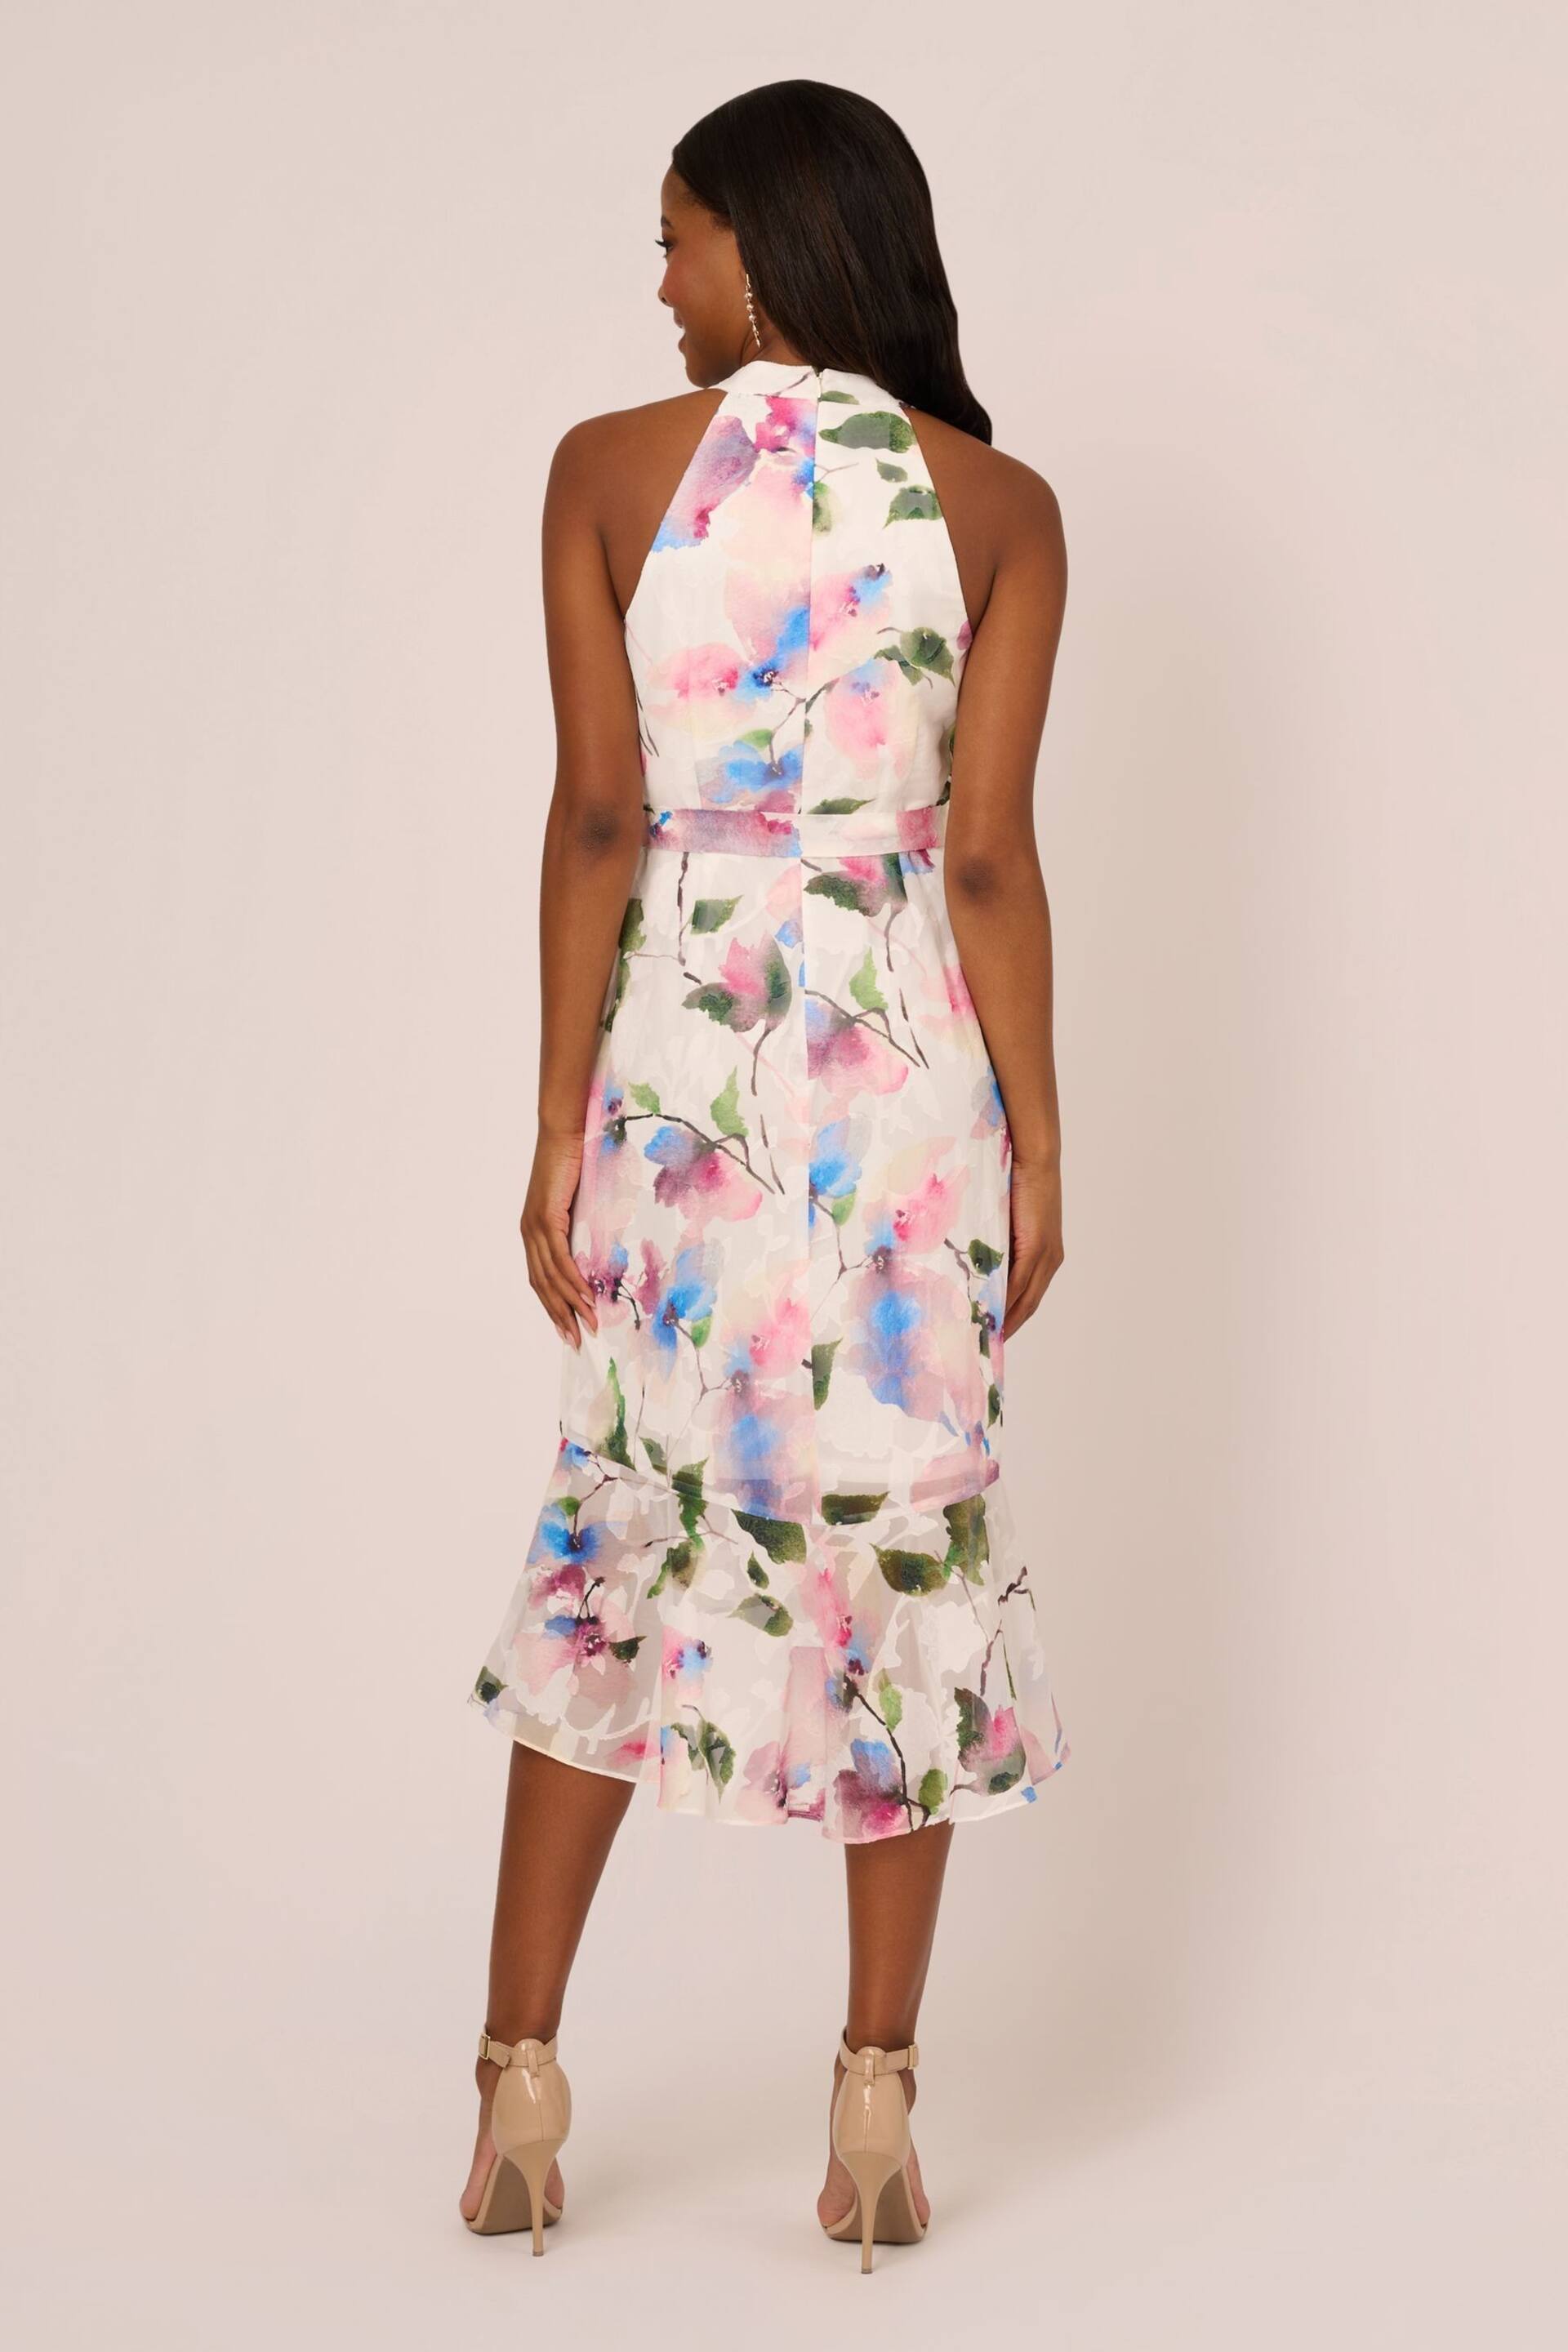 Adrianna Papell White Printed High-Low Dress - Image 2 of 7